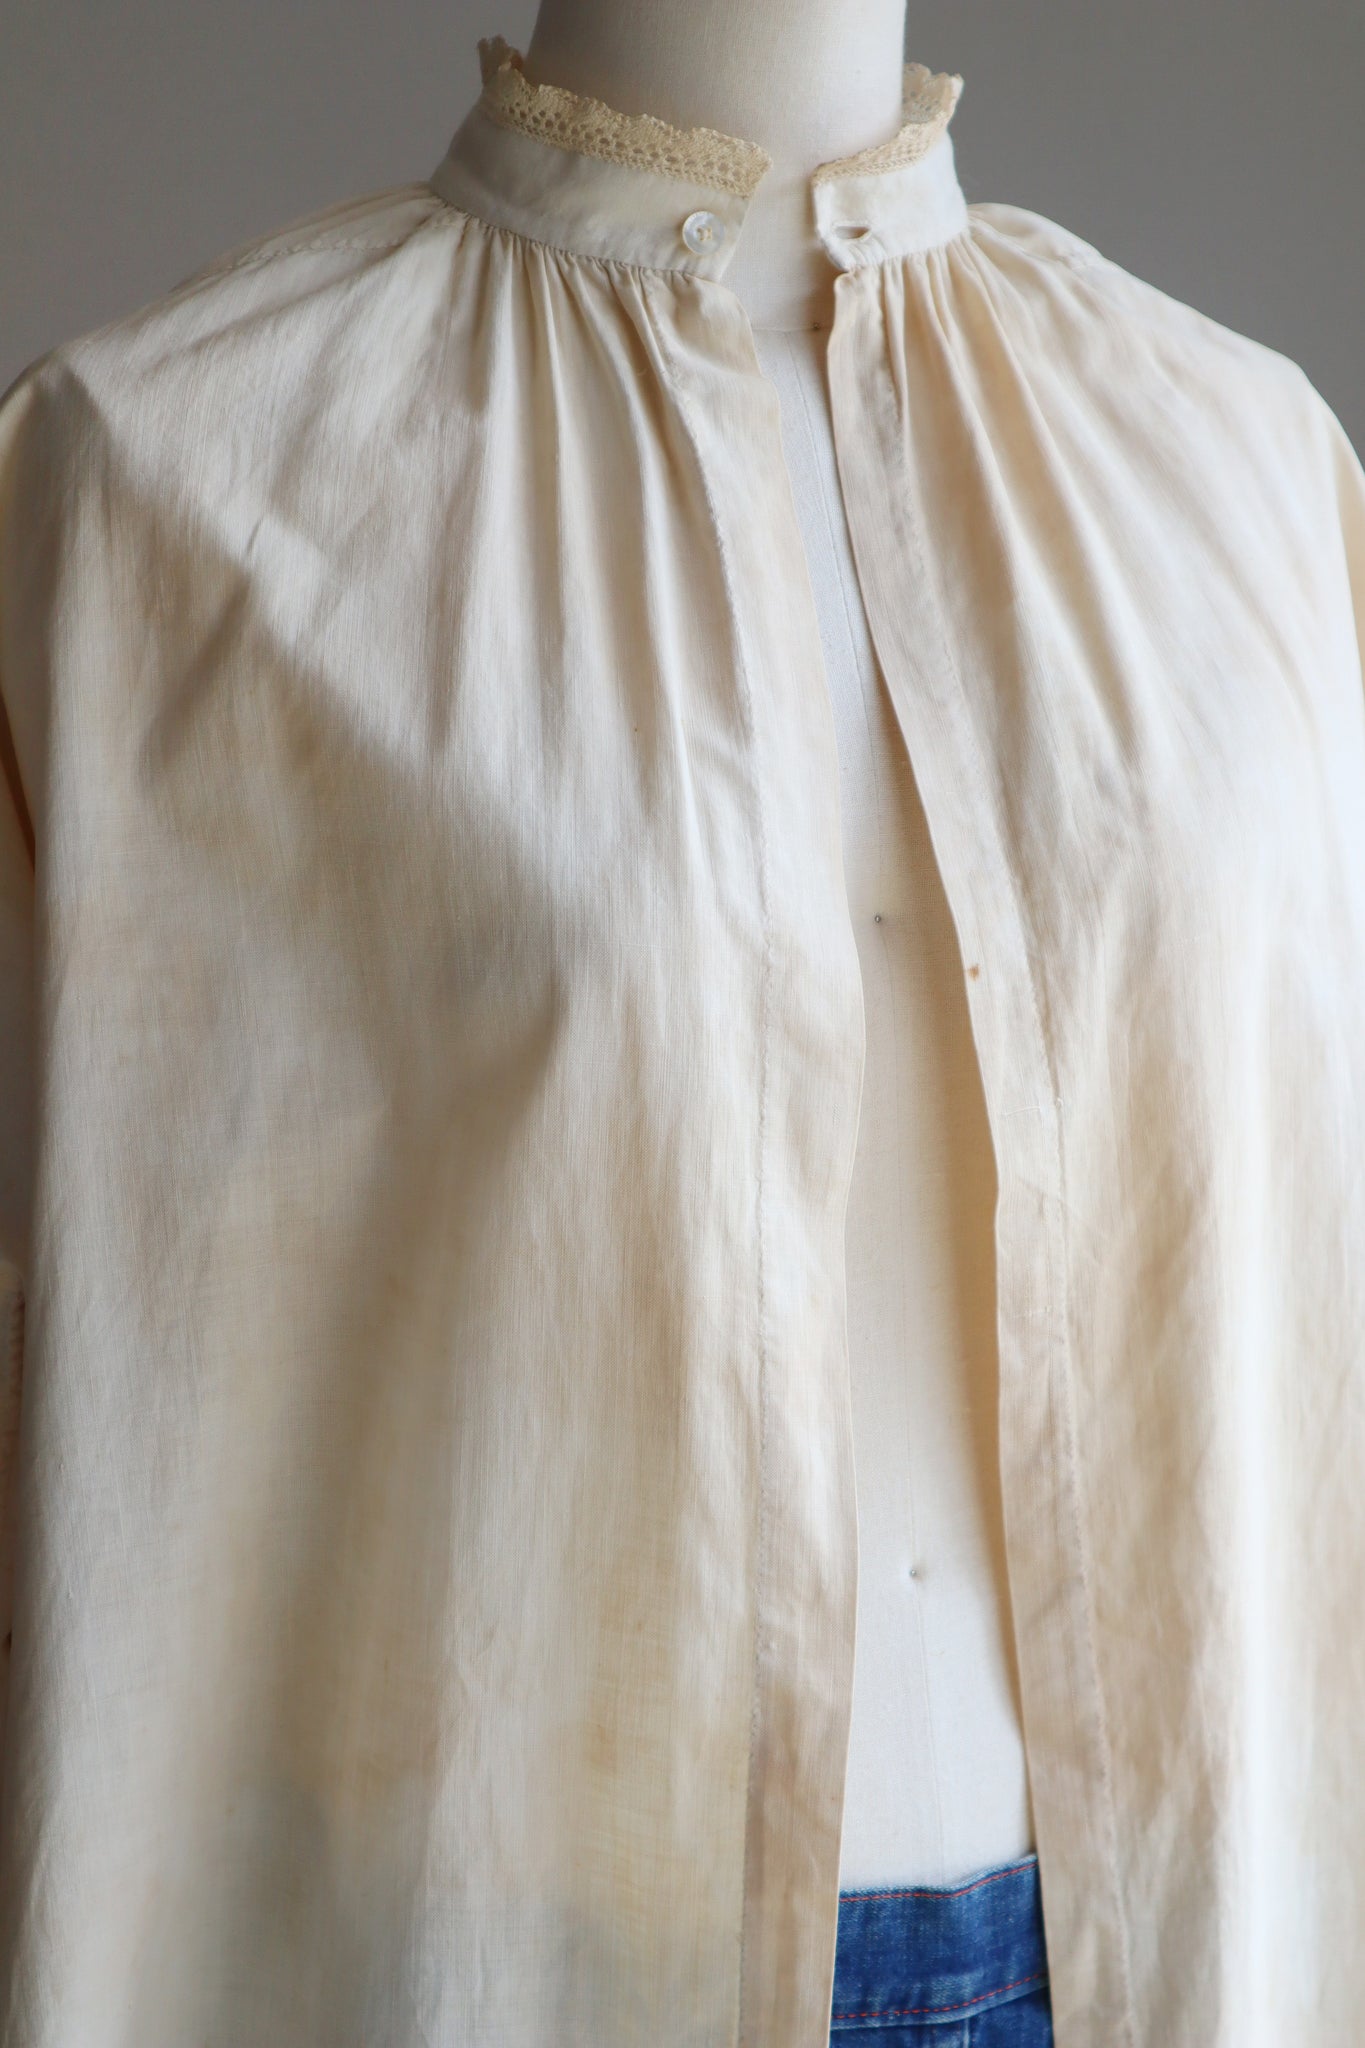 Late 1800s All Hand Sewn Blouse